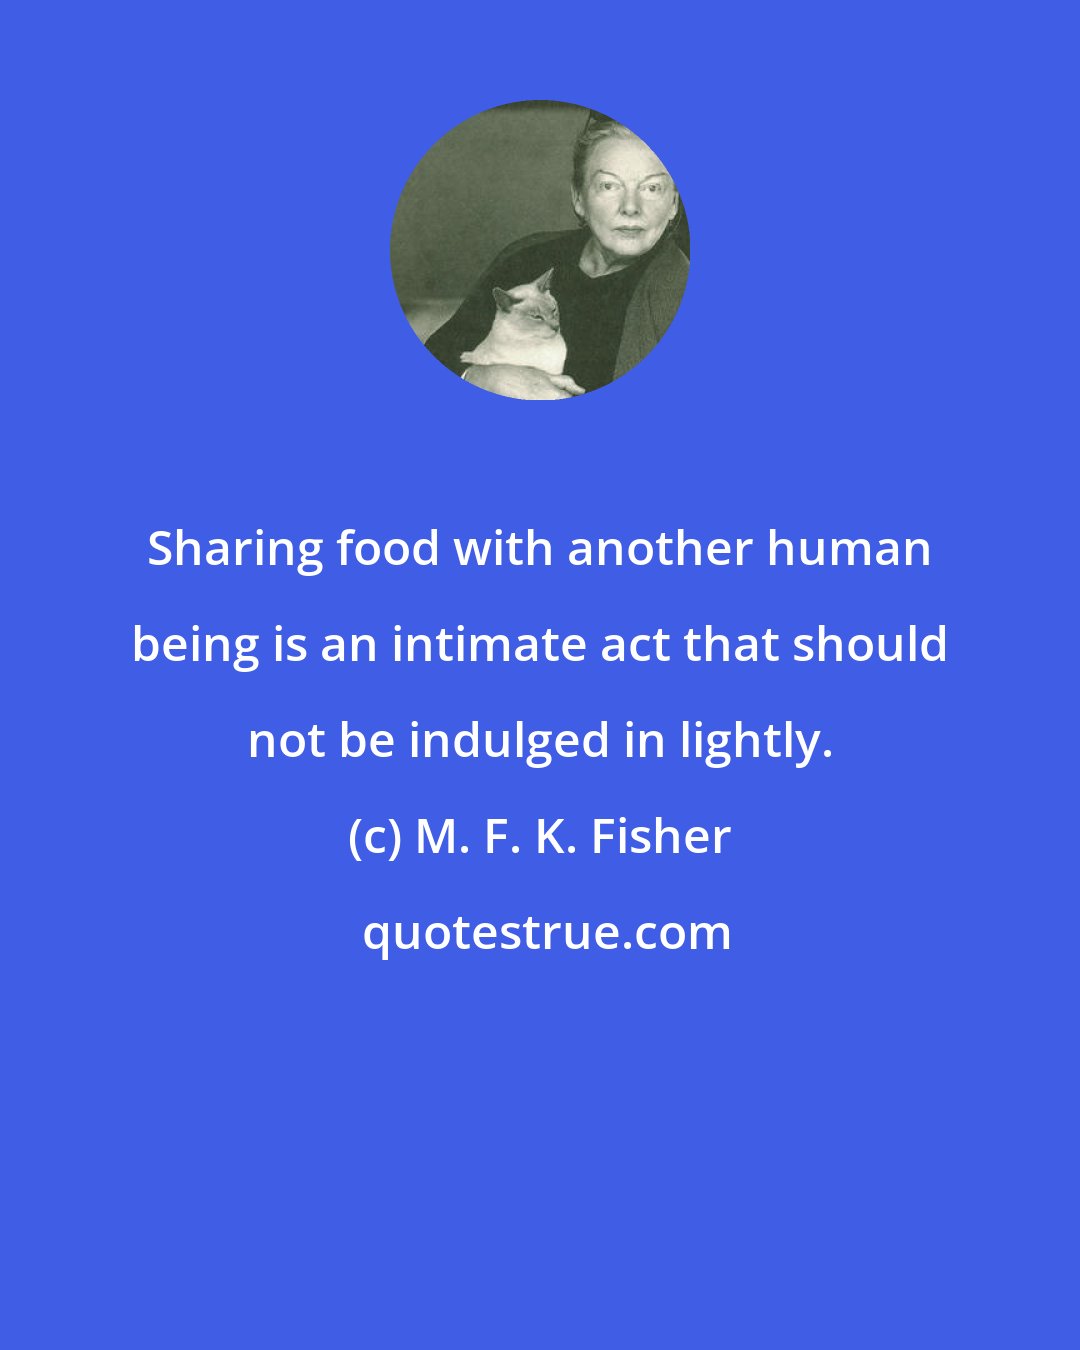 M. F. K. Fisher: Sharing food with another human being is an intimate act that should not be indulged in lightly.